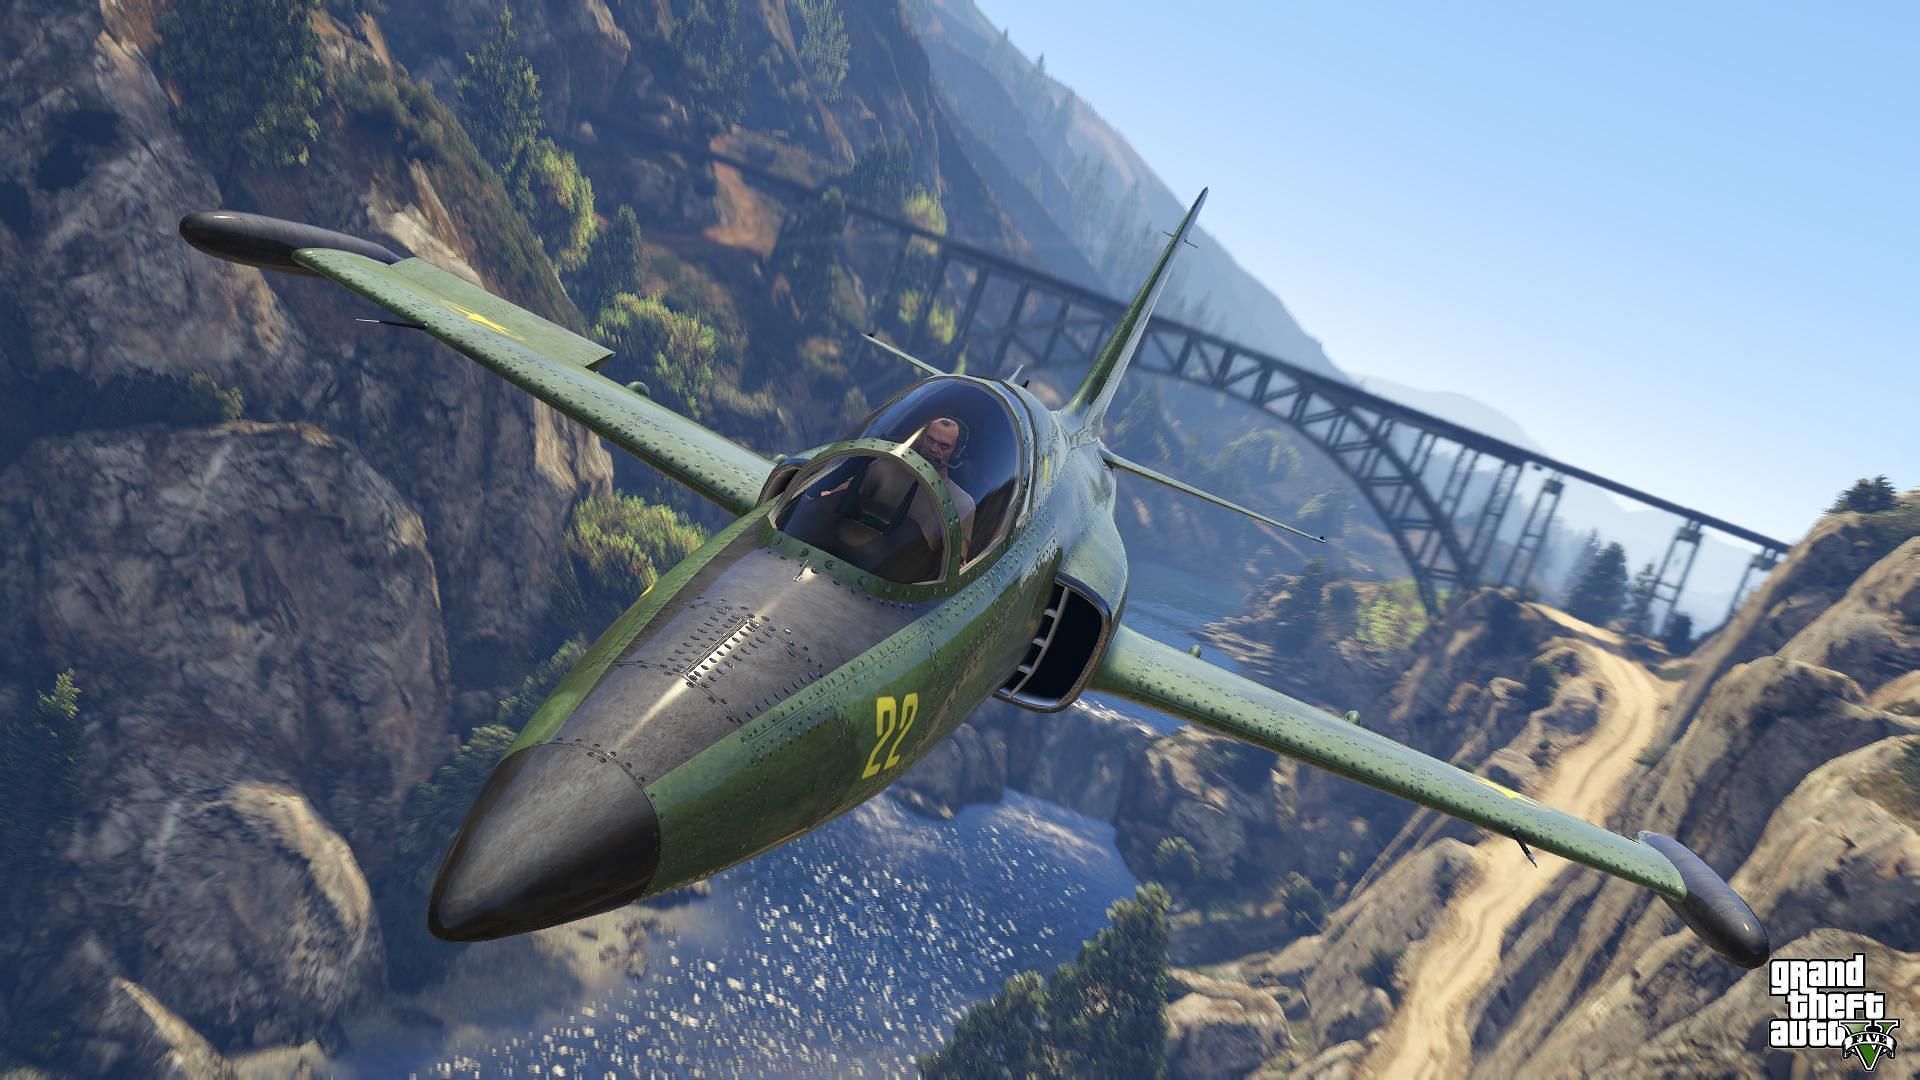 This plane is also available in story mode (Image via GTA Base)